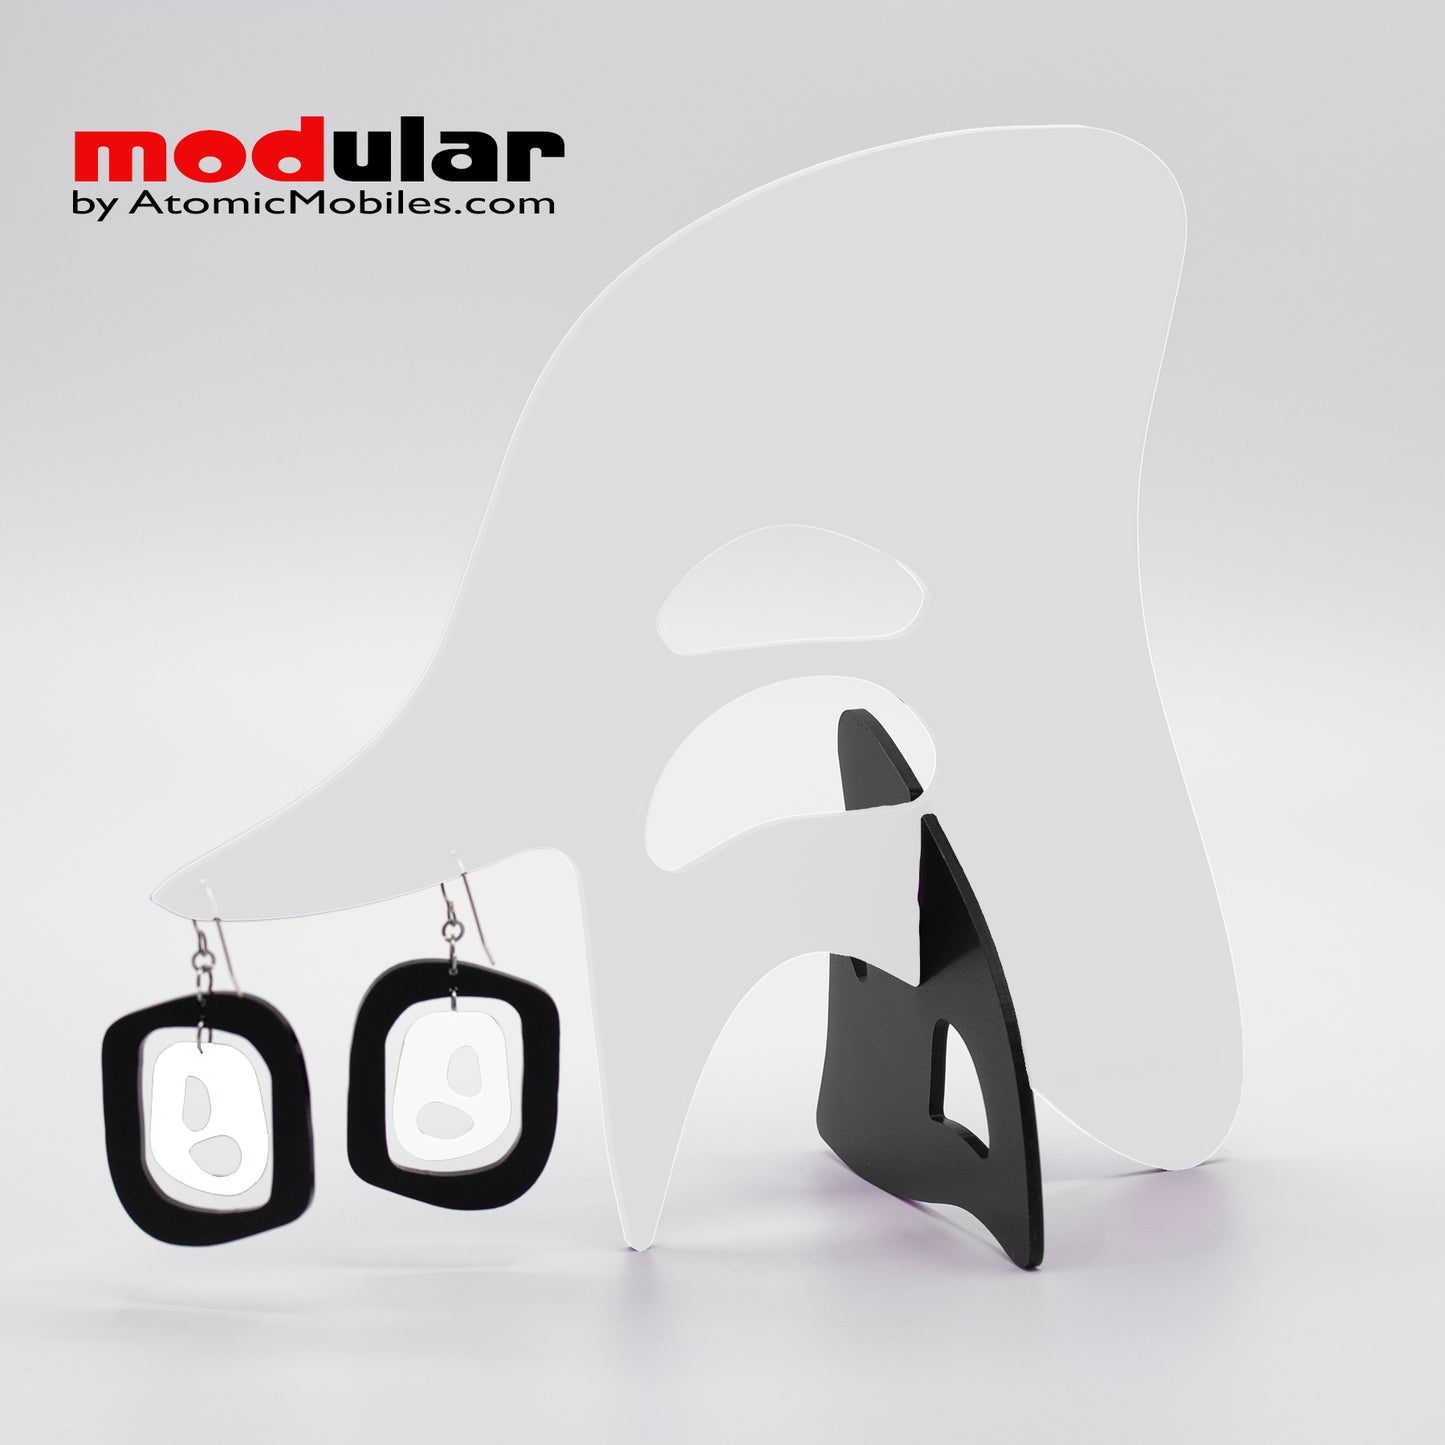 Handmade Mid 20th mod style earrings and stabile kinetic modern art sculpture in White and Black by AtomicMobiles.com